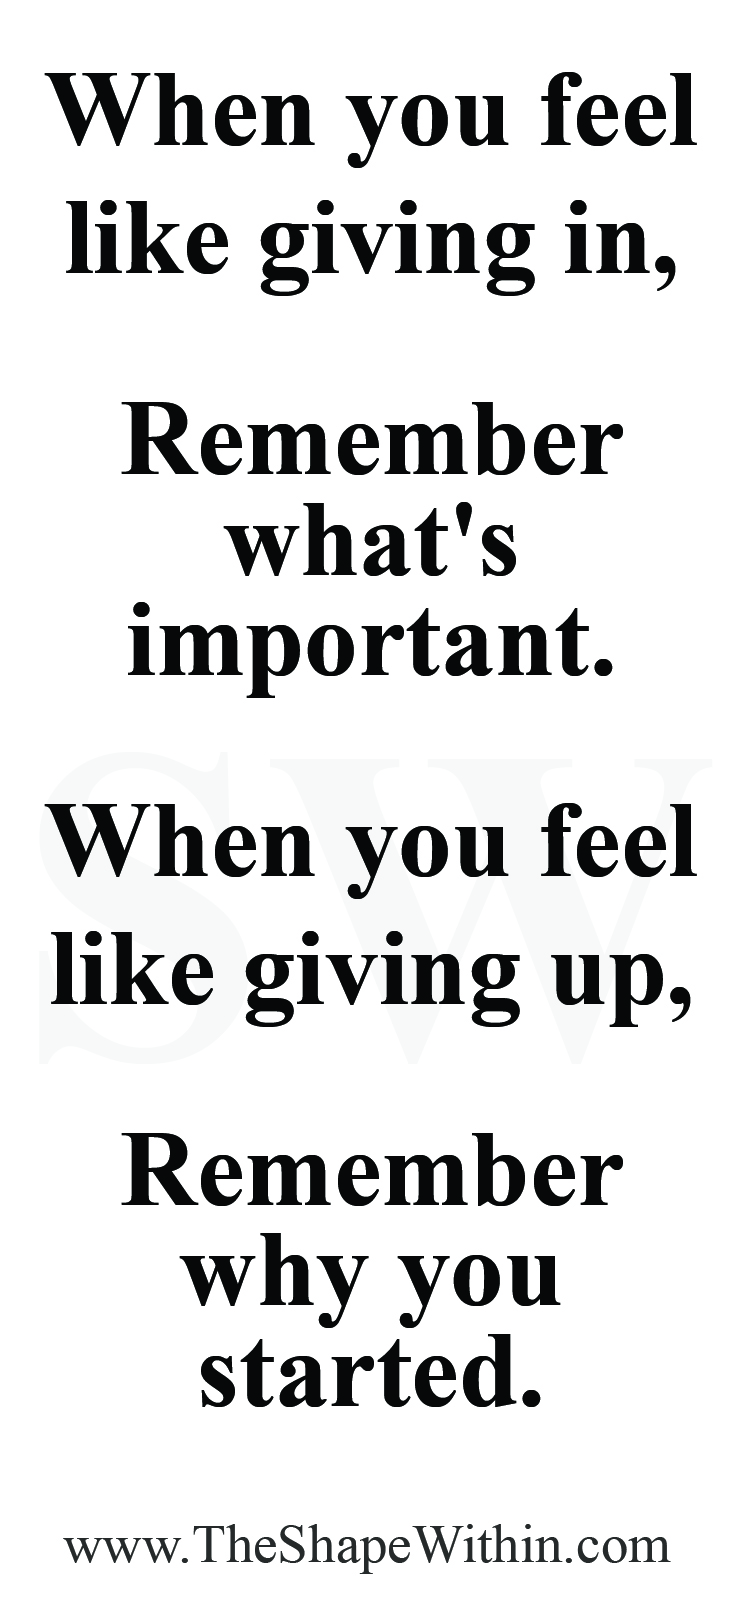 "When you feel like giving in, remember what's important" - Fitness motivation | TheShapeWithin.com